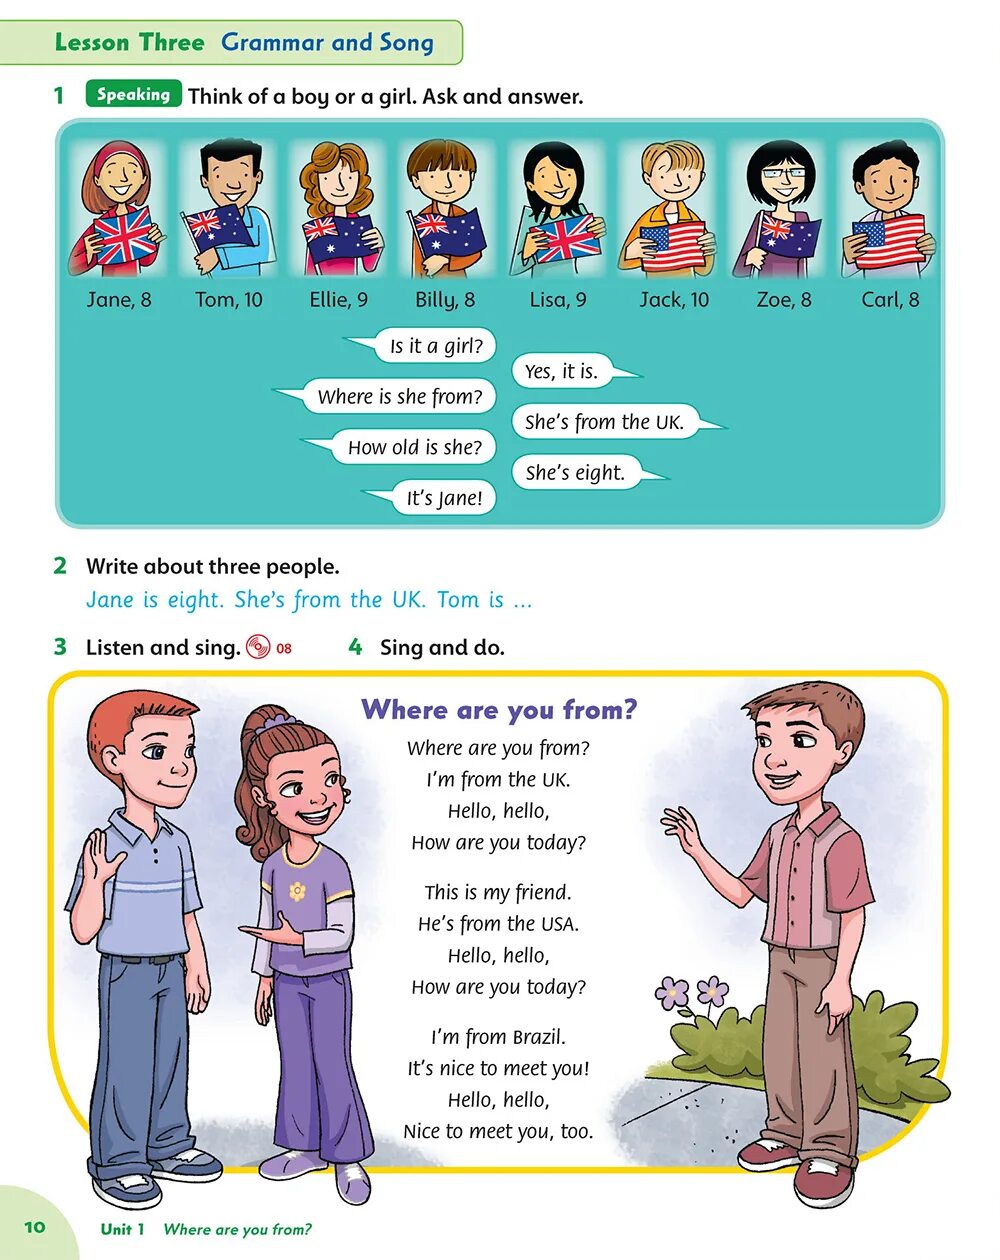 Family student book. Учебник Family and friends 3. Grammar 3 класс Family and friends. Family friends 3 класс 2 издание. Family and friends уровни.